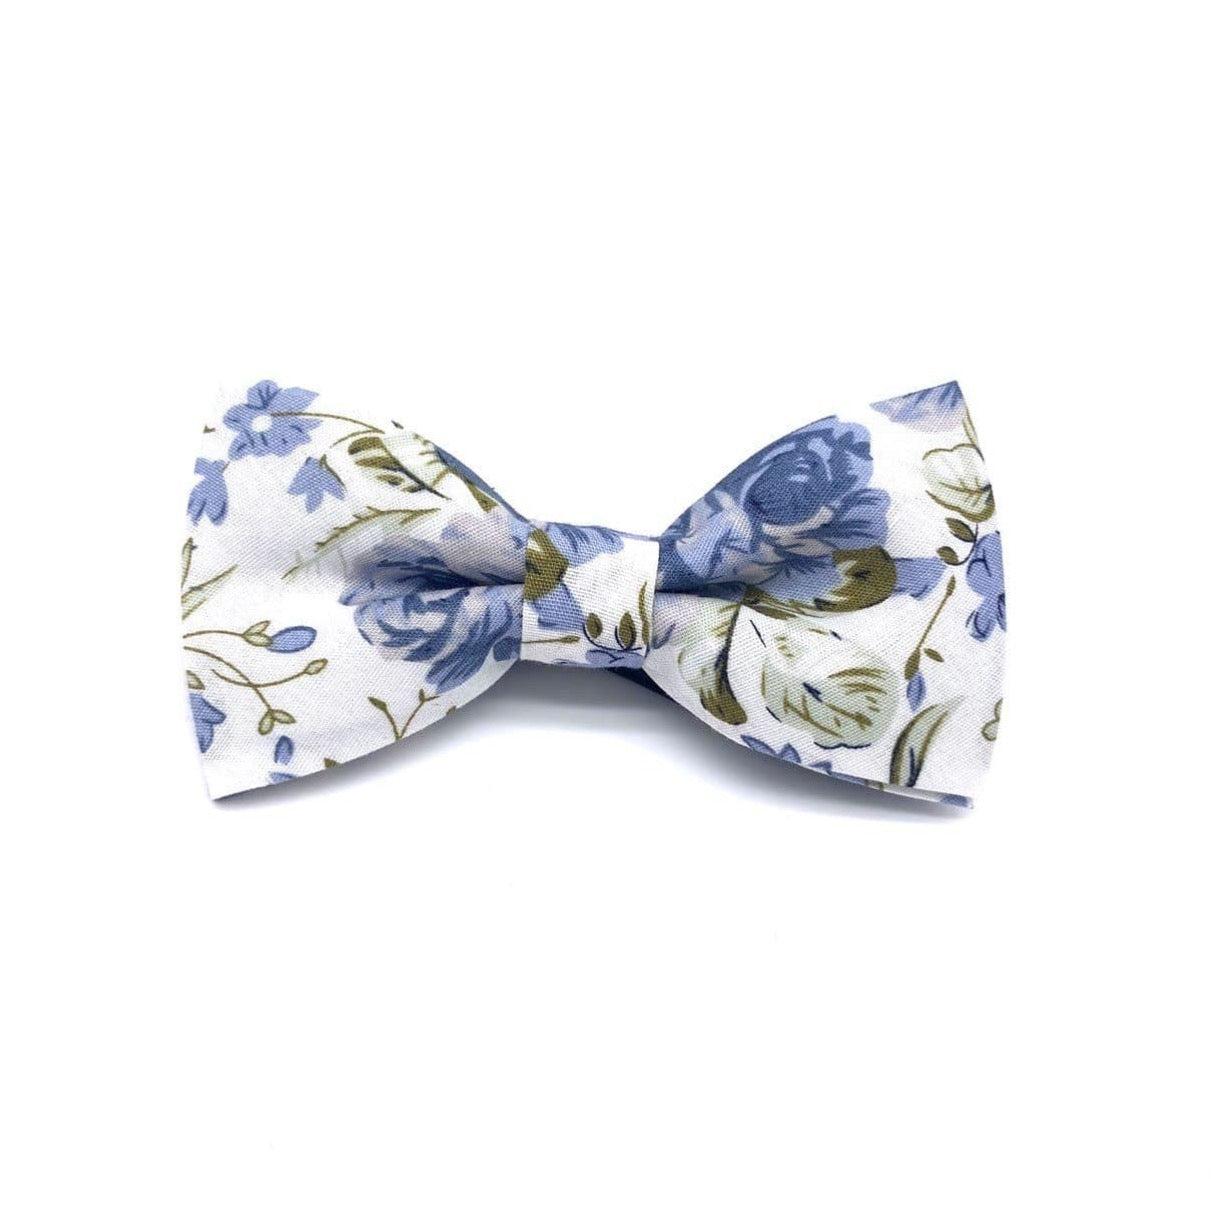 Kids White Floral Bow Tie (Pretied) Mytieshop - SAM | toile de jouy Floral Bow Tie-Kid's Floral bow tie - toile de jouy Floral Bow Tie Strap is adjustablePre-Tied bowtieBow Tie 10.5 * 6CMFor toddlers ages 0- Great for Prom Dinners Interviews Photo shoots Photo sessions Dates Wedding Attendant Ring Bearers Aspen Floral Bow tie . Fits toddlers and babies. Aspen ow tie toddler floral for wedding and events groom groomsmen flower bow tie mytieshop ring bearer page boy bow tie white bow tie white and